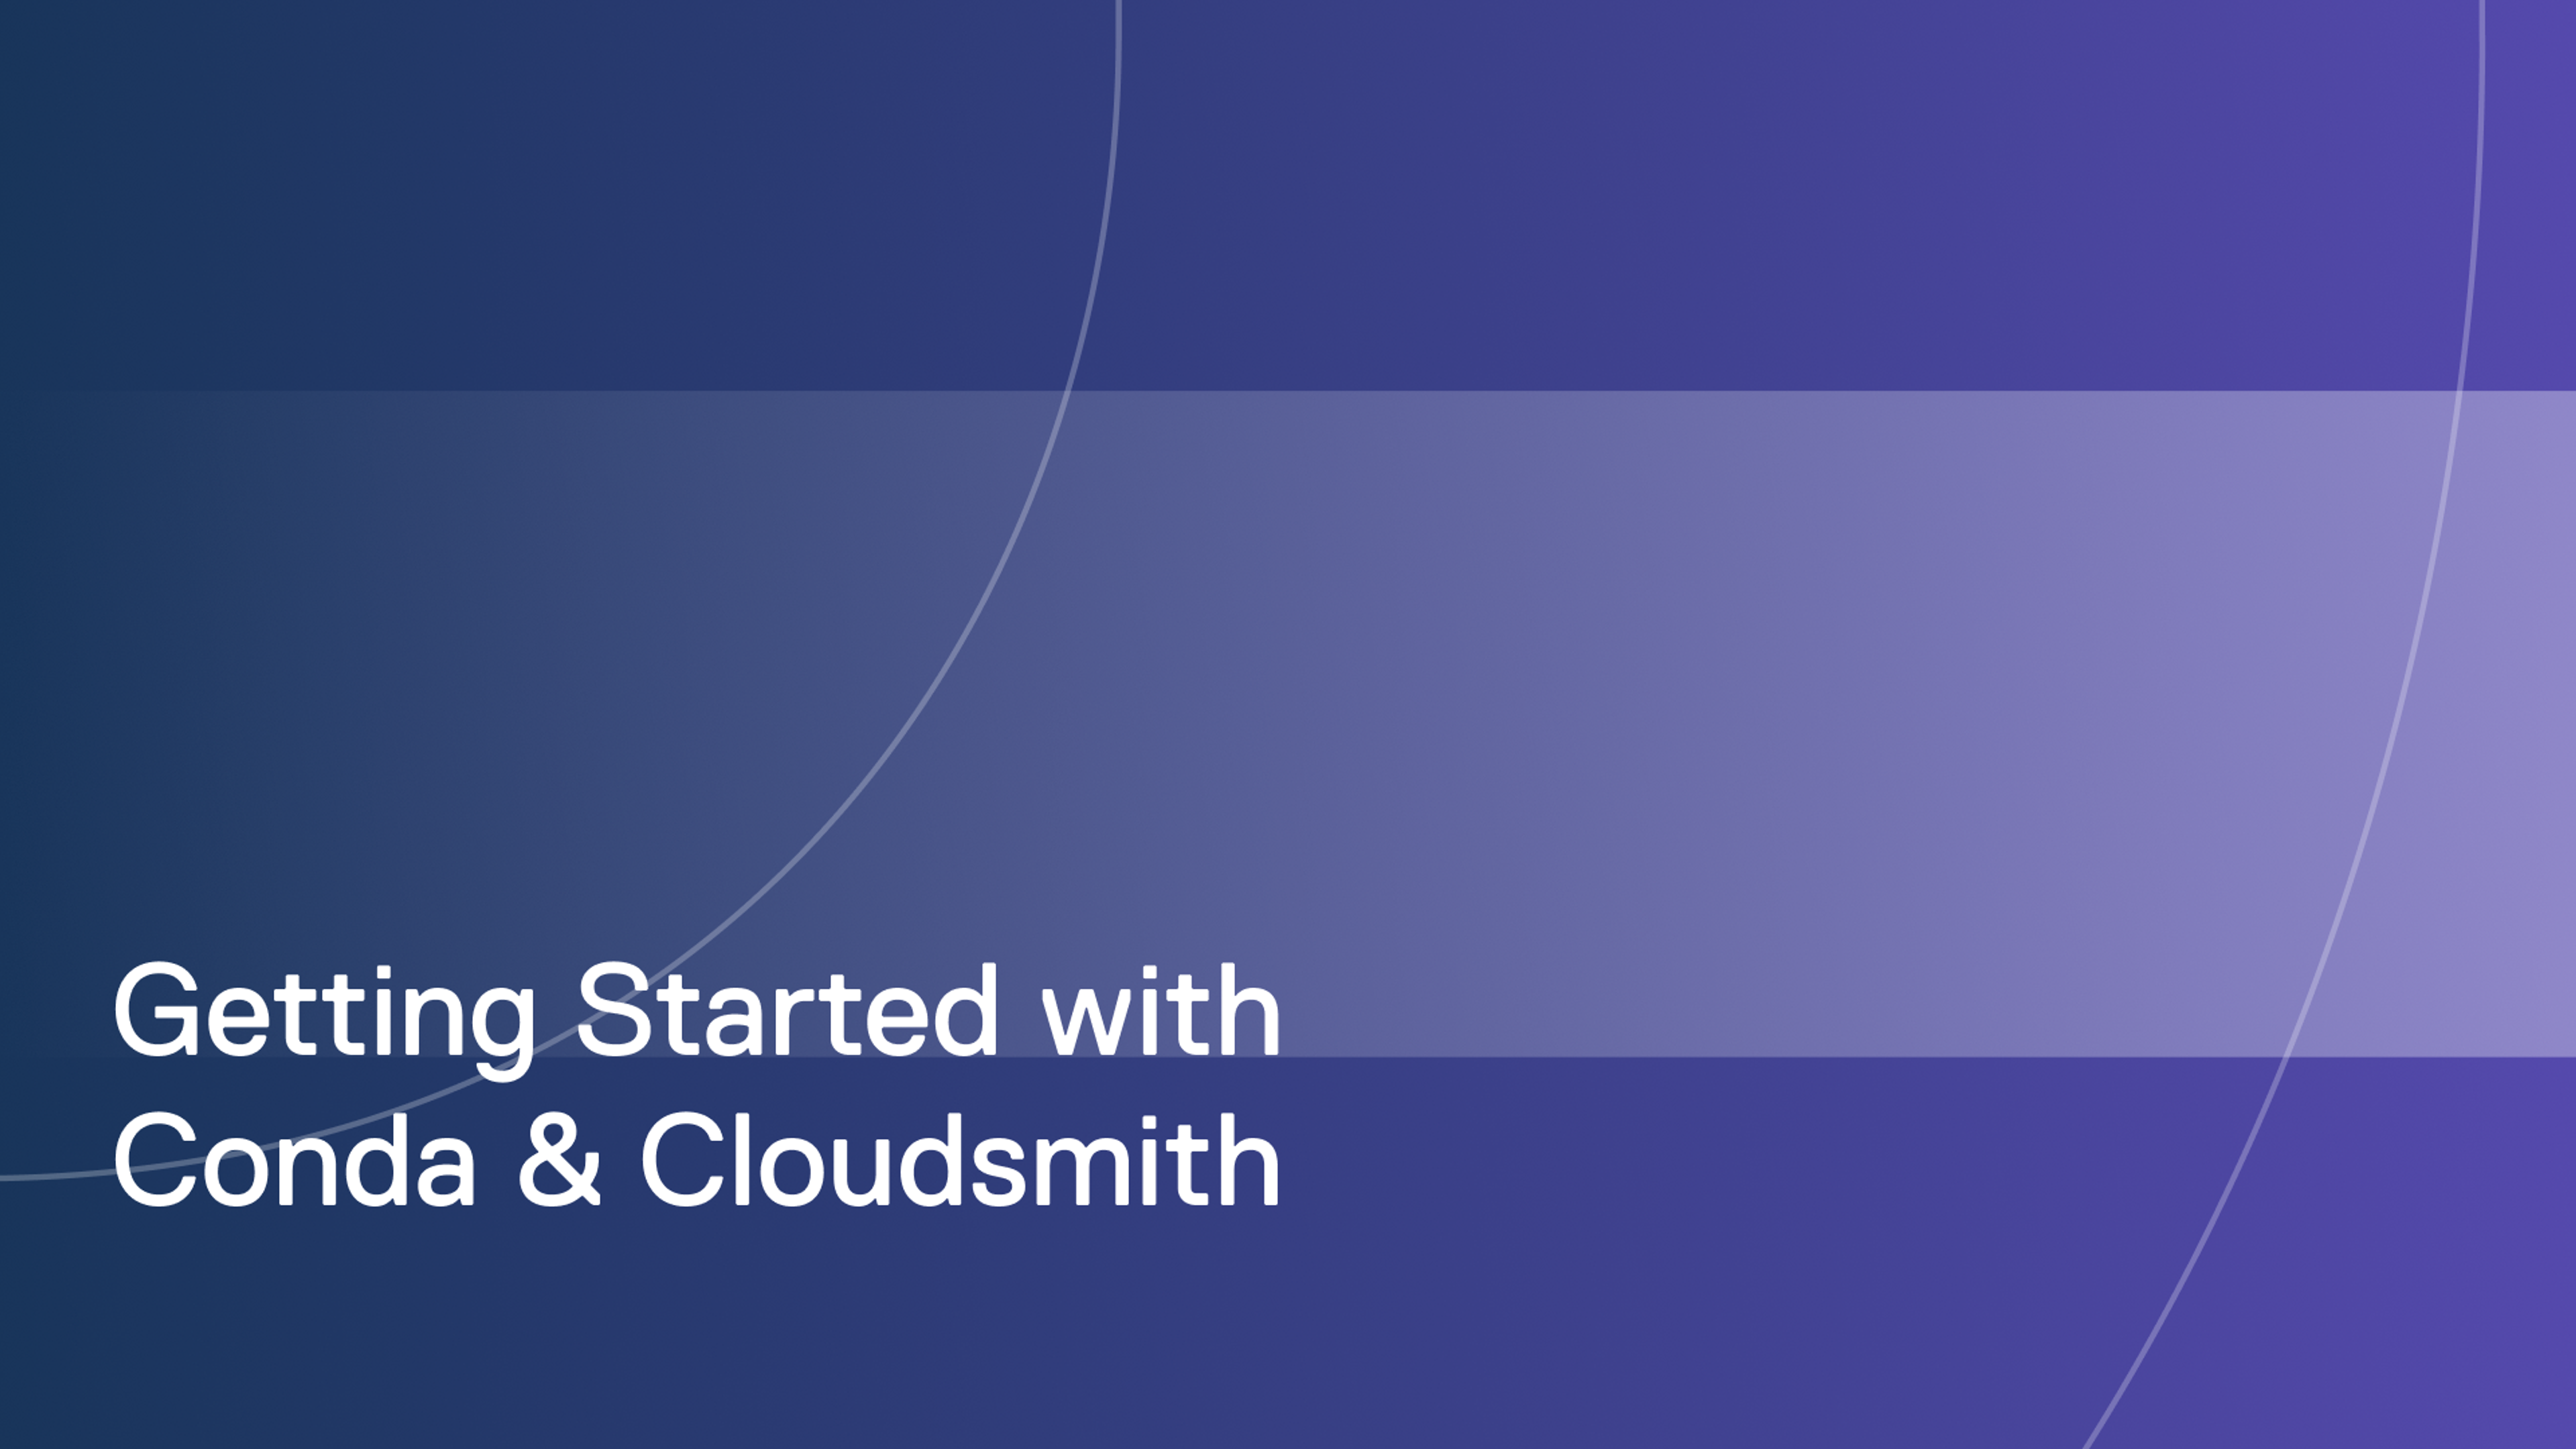 Getting started with Conda and Cloudsmith